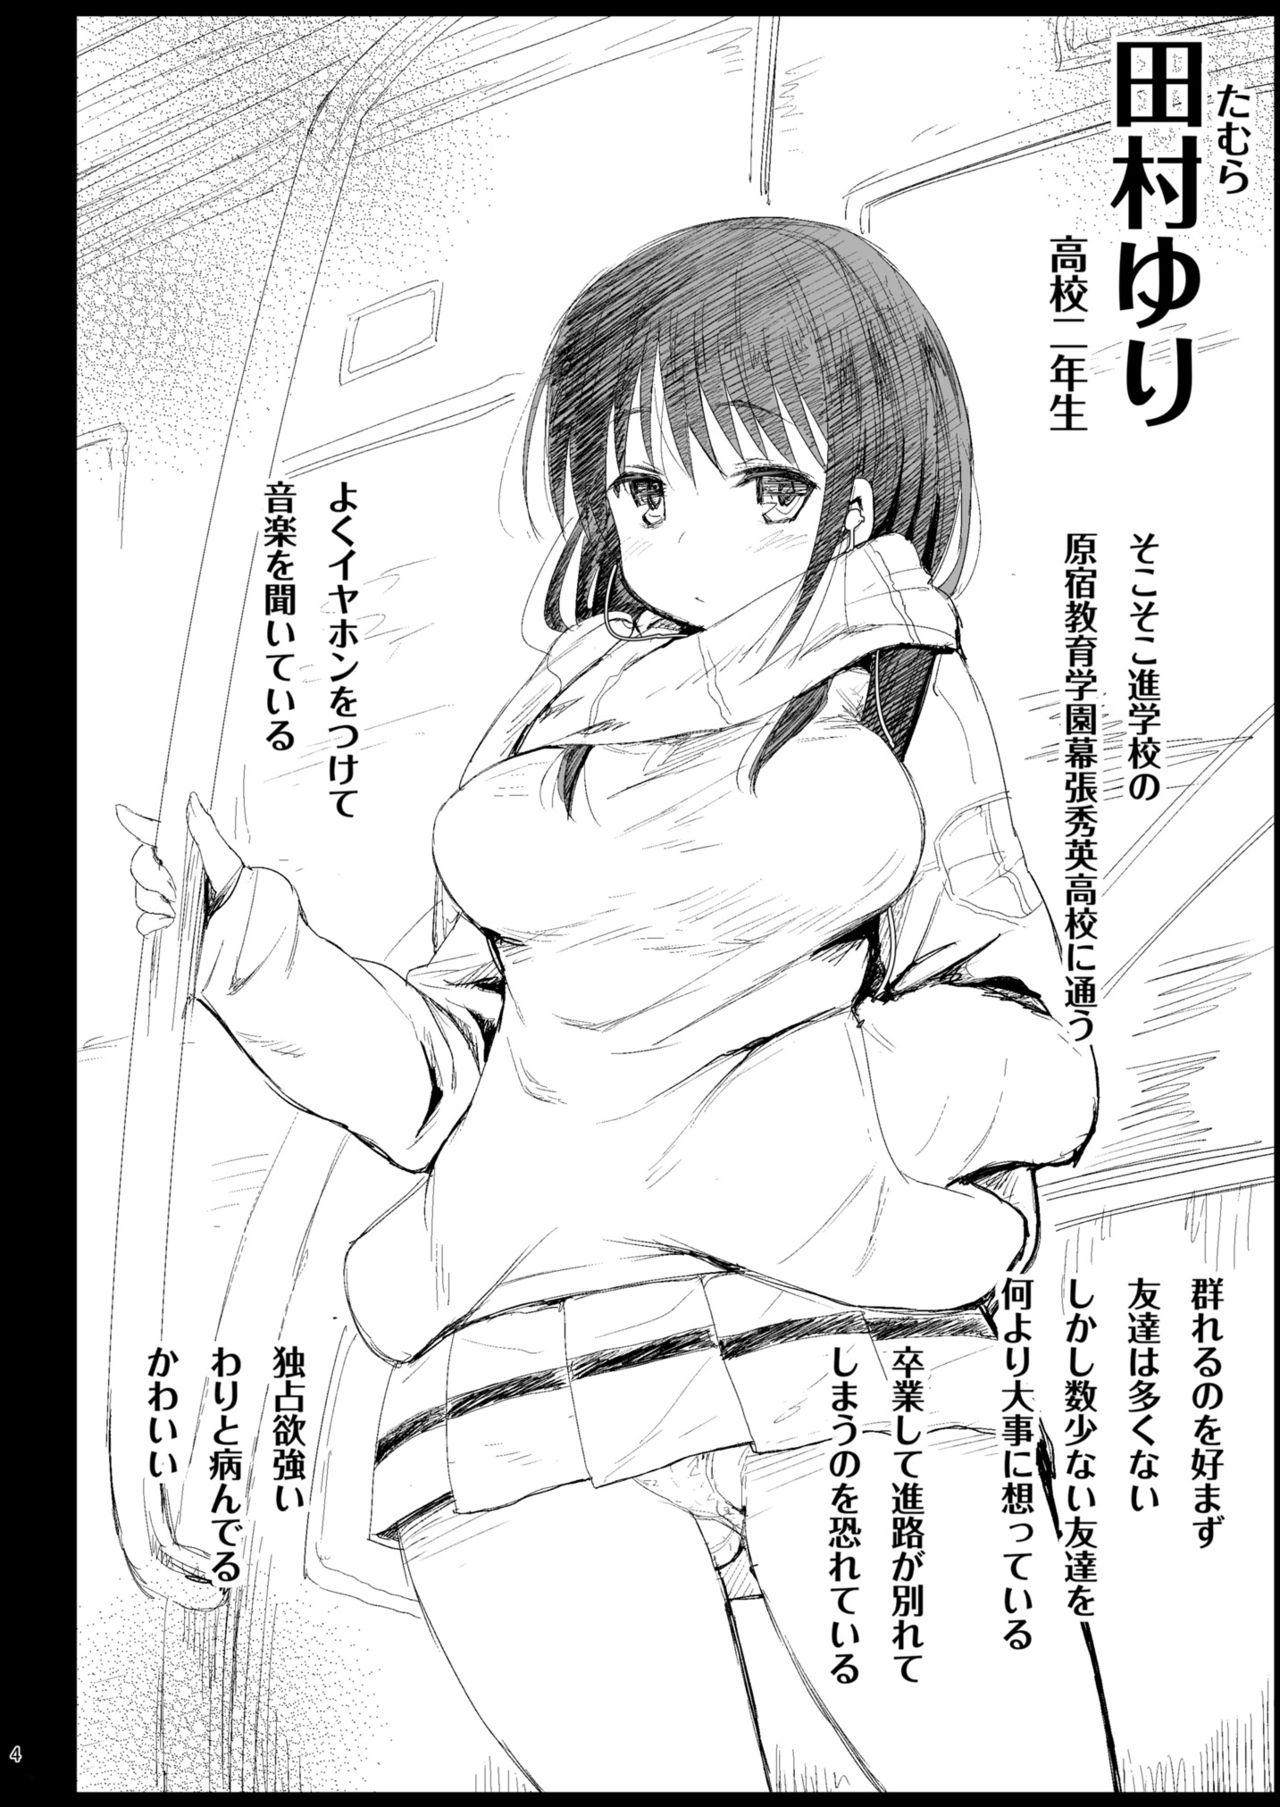 Chichona Haranjau Yuri-chan - Its not my fault that im not popular Couple - Page 4